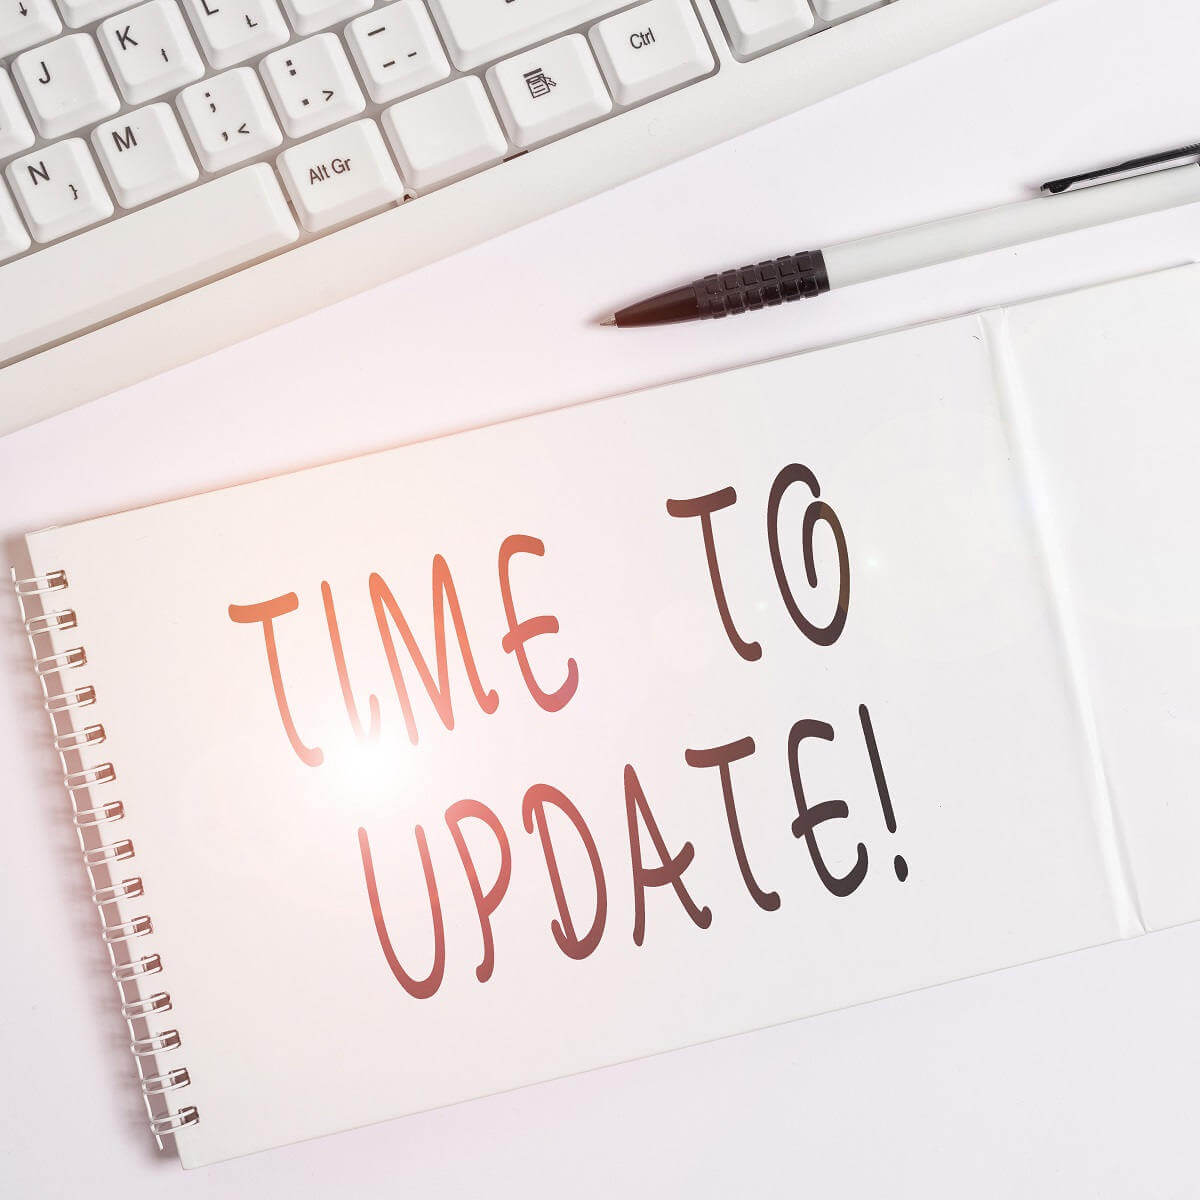 Download Patch Tuesday updates